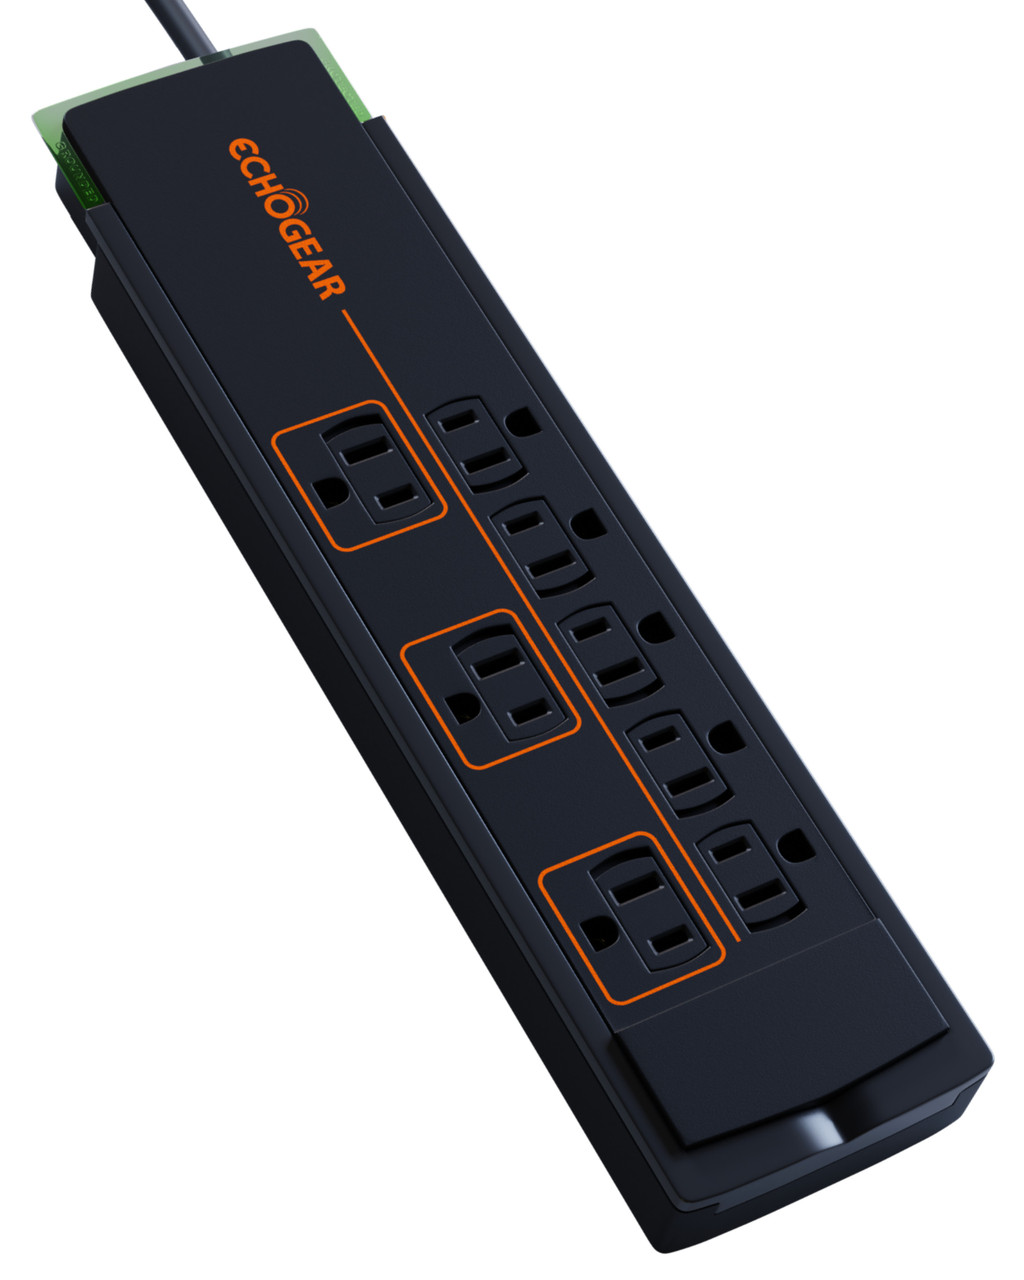 Low Profile Surge Protector Power Strip With Heavy Duty Surge